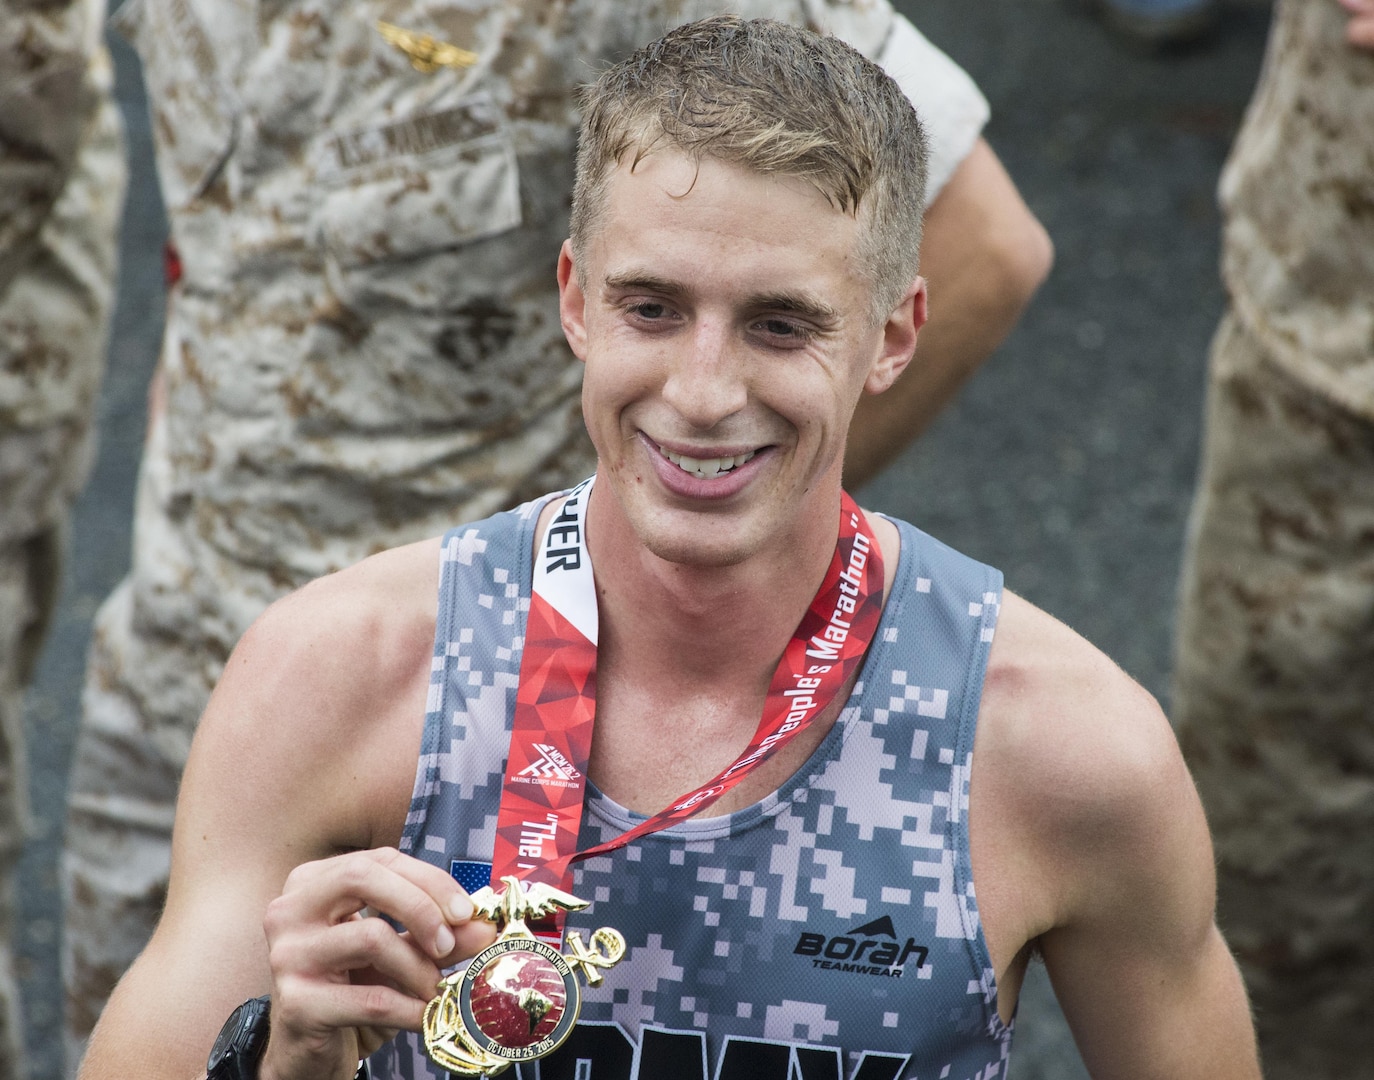 Overall winner of the 40th Marine Corps Marathon, 22 year old U.S. Army Lt. Trevor Lafontaine, from Cornwall, N.Y., smiles and holds up his medal after completing his first marathon at 2:24:25 in Arlington, Va., Oct. 25, 2015. Also known as "The People's Marathon," the 26.2 mile race drew roughly 30,000 participants to promote physical fitness, generate goodwill in the community, and showcase the organizational skills of the Marine Corps. (U.S. Marine Corps photo by Staff Sgt. Sarah R. Hickory/Released)